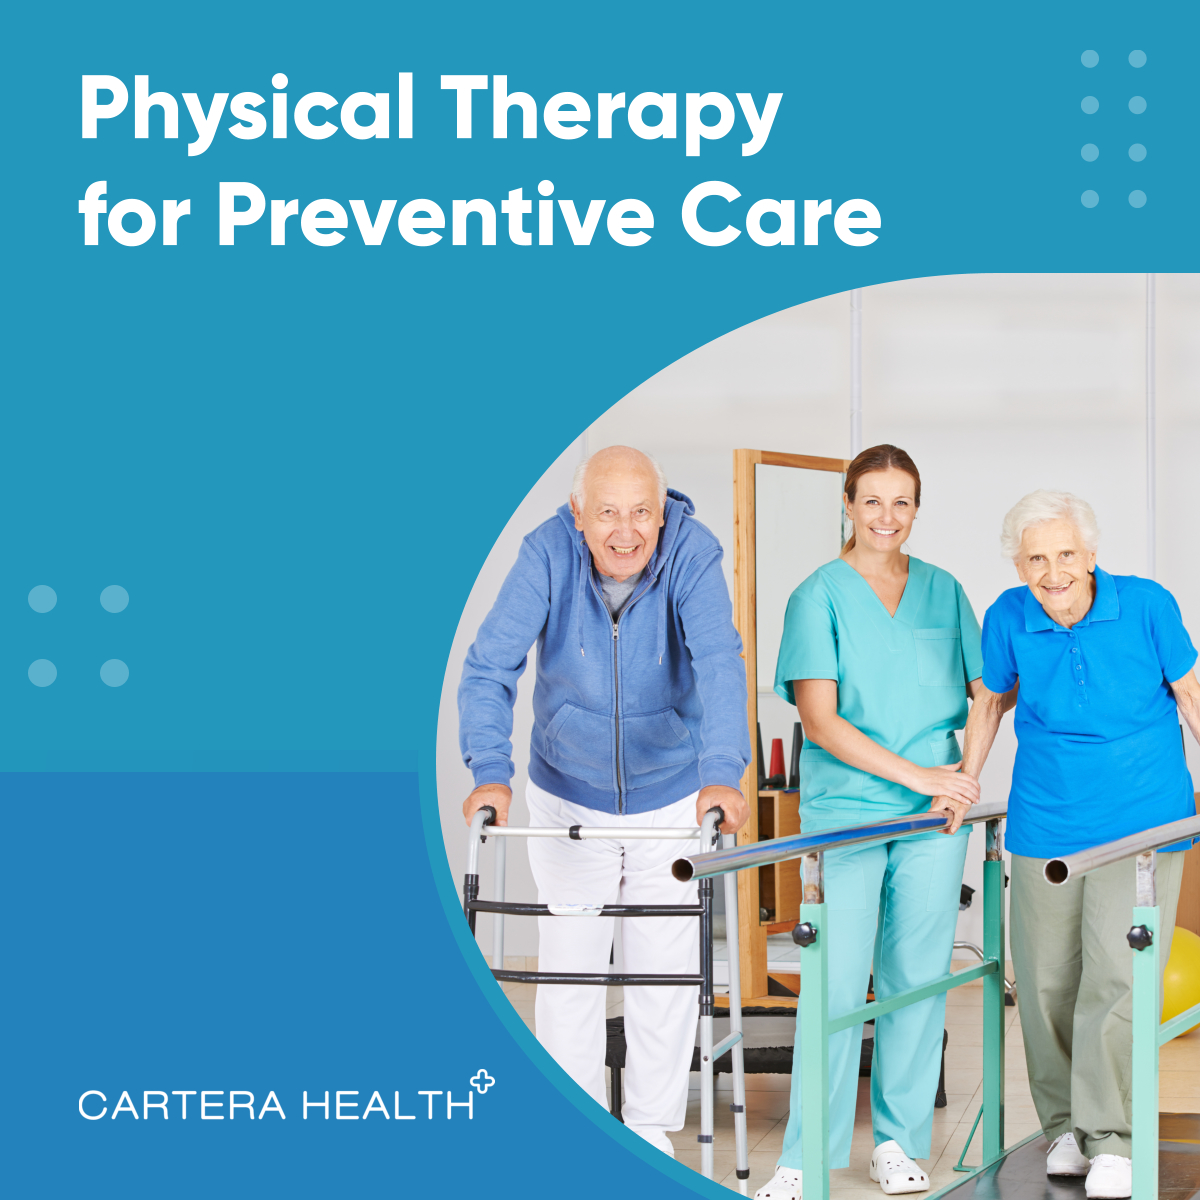 With age, people tend to lose their sense of balance and physical strength, making them more prone to accidents and falls...

Read more: facebook.com/CarteraHealth/… 

#SugarLandTX #PhysicalTherapy #PreventiveCare #HomeHealthCareServices #ImproveBalance